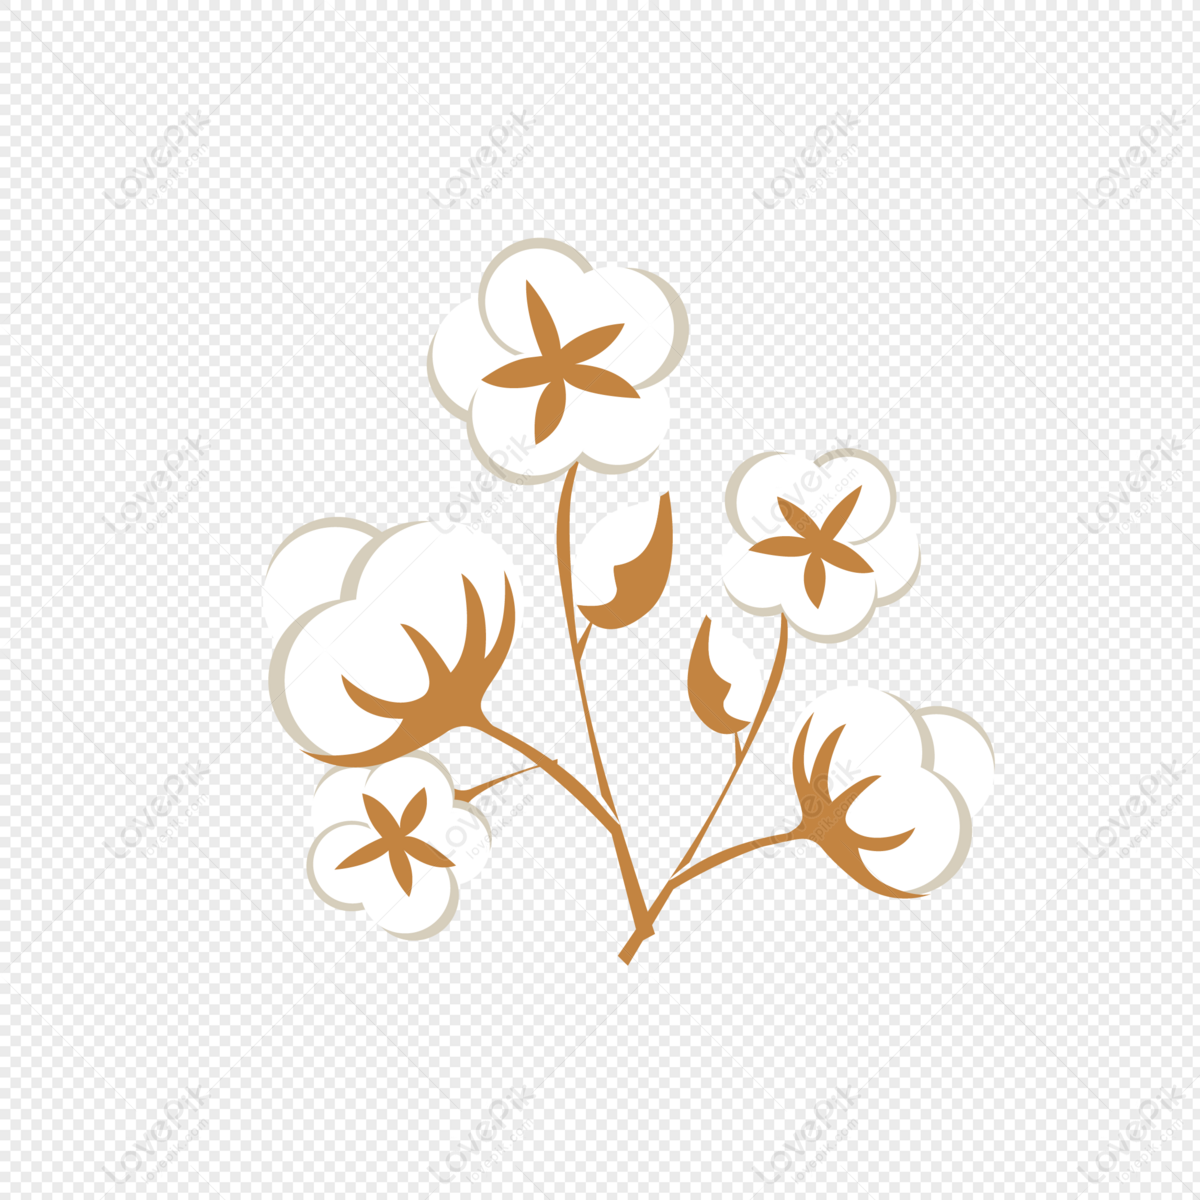 Aesthetic Drawn Flowers Decoration Image PNG Image And Clipart Image ...